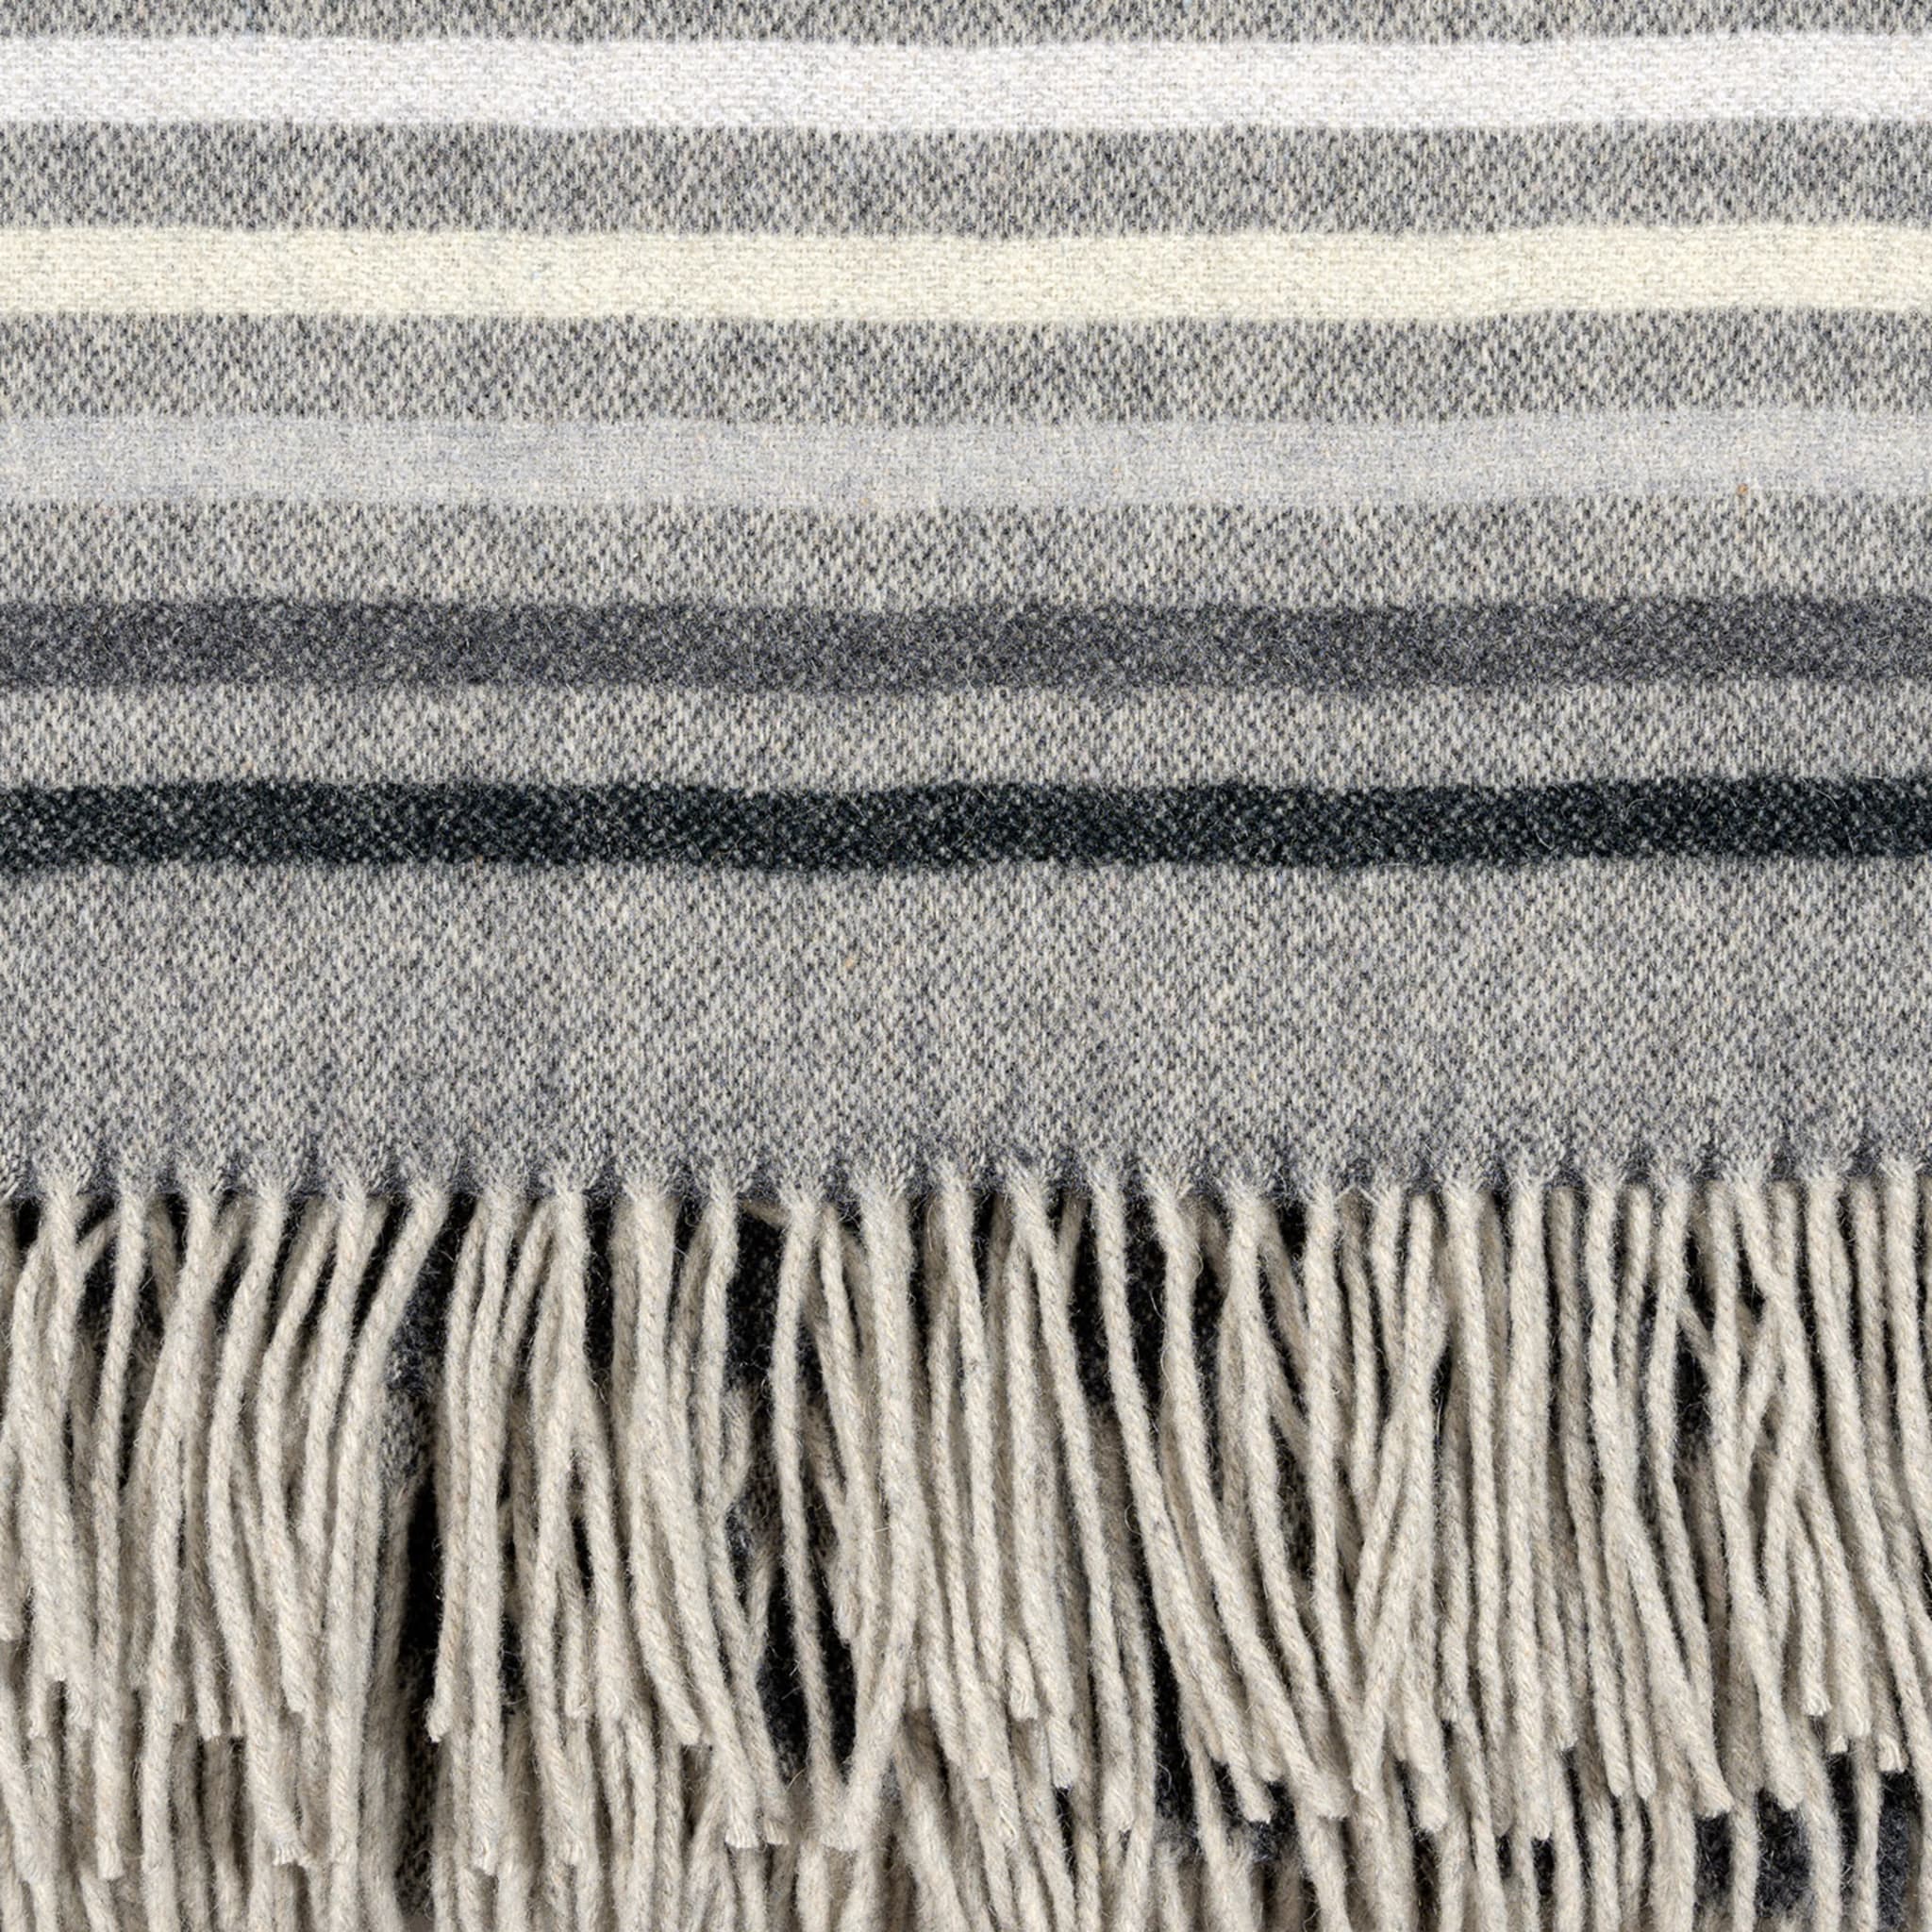 Tailor Gray Small Blanket - Alternative view 1